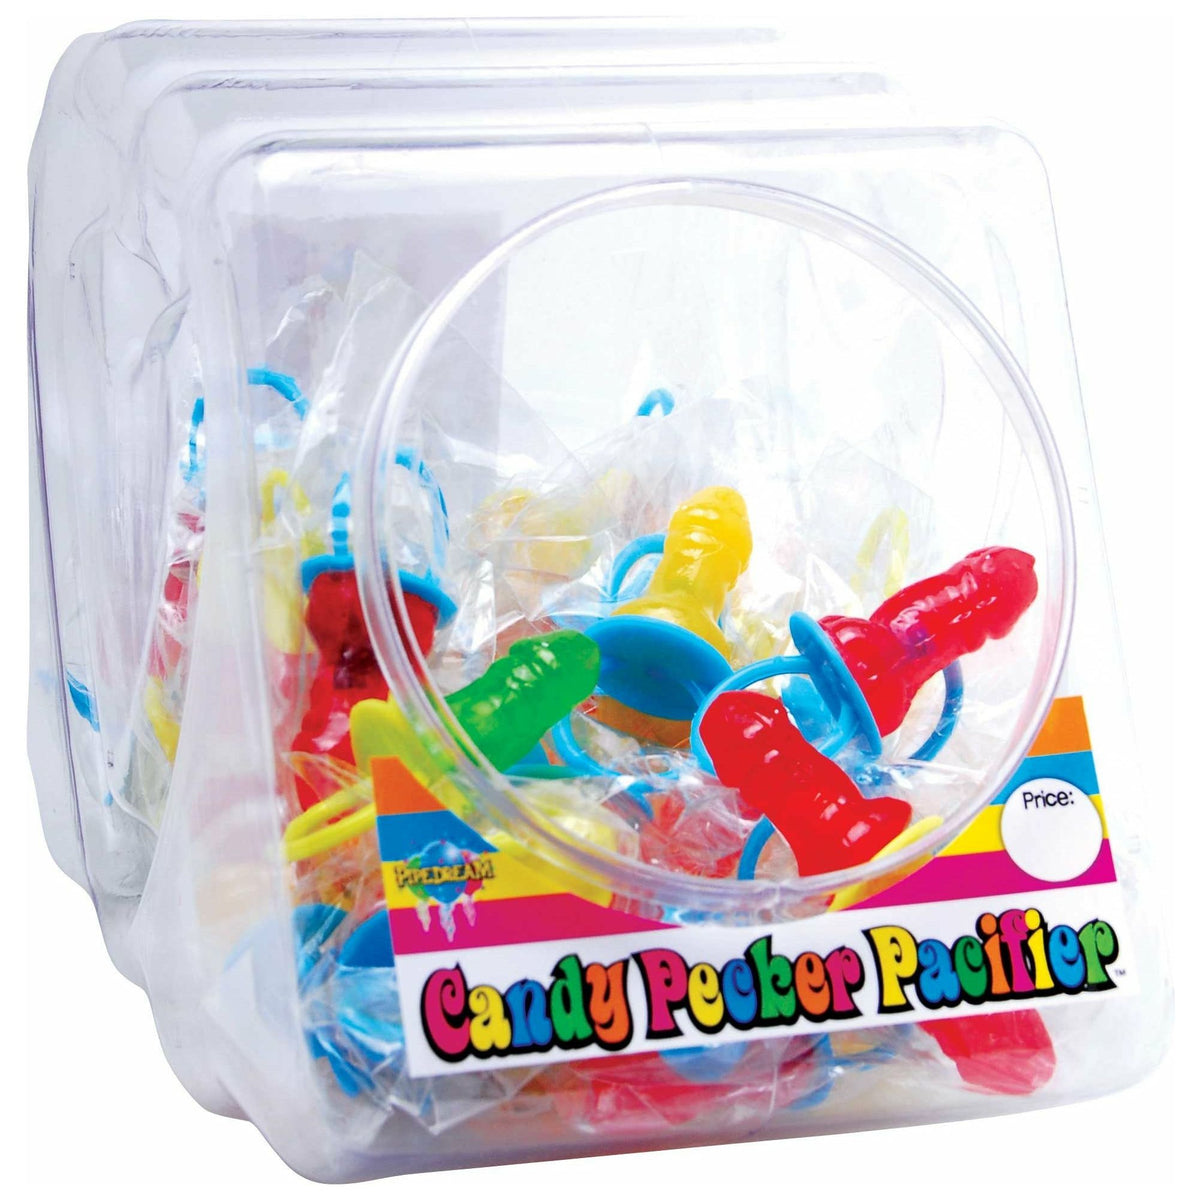 Pipedream Products Candy Pecker Pacifier ~ Display of 48